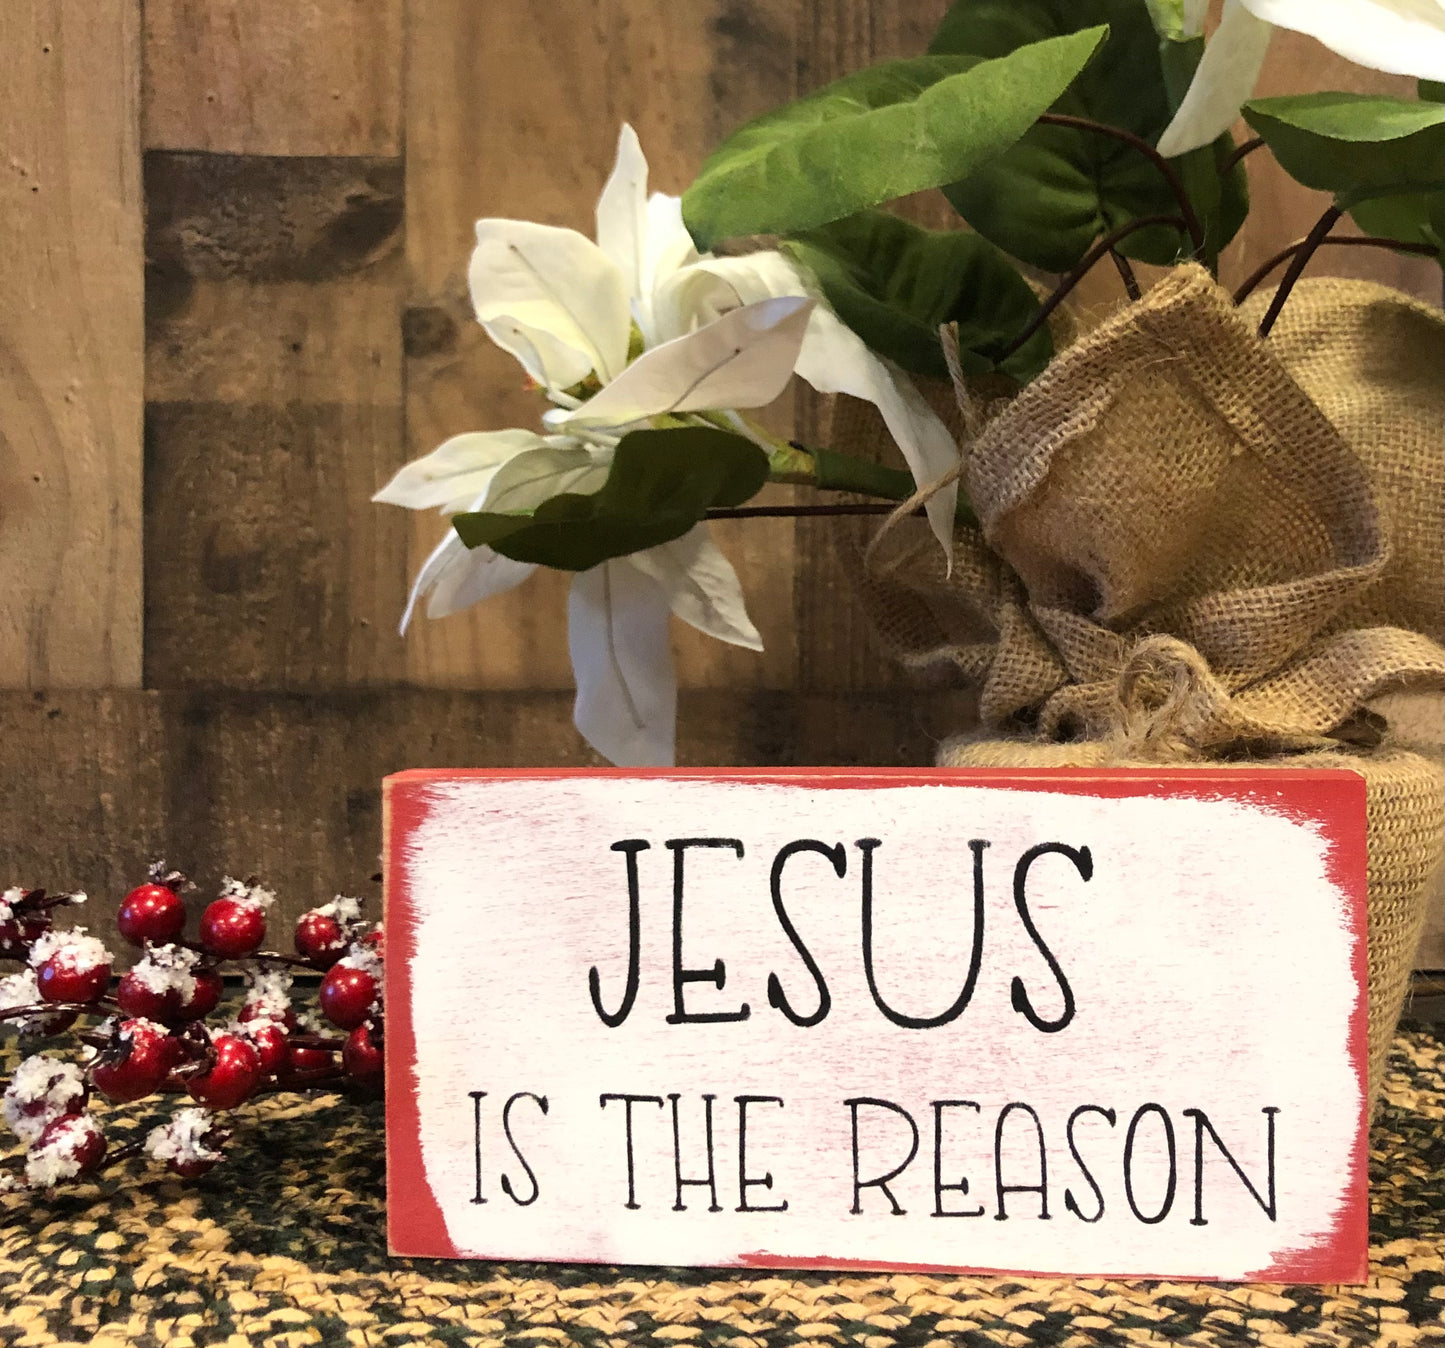 "Jesus is the reason" wood sign